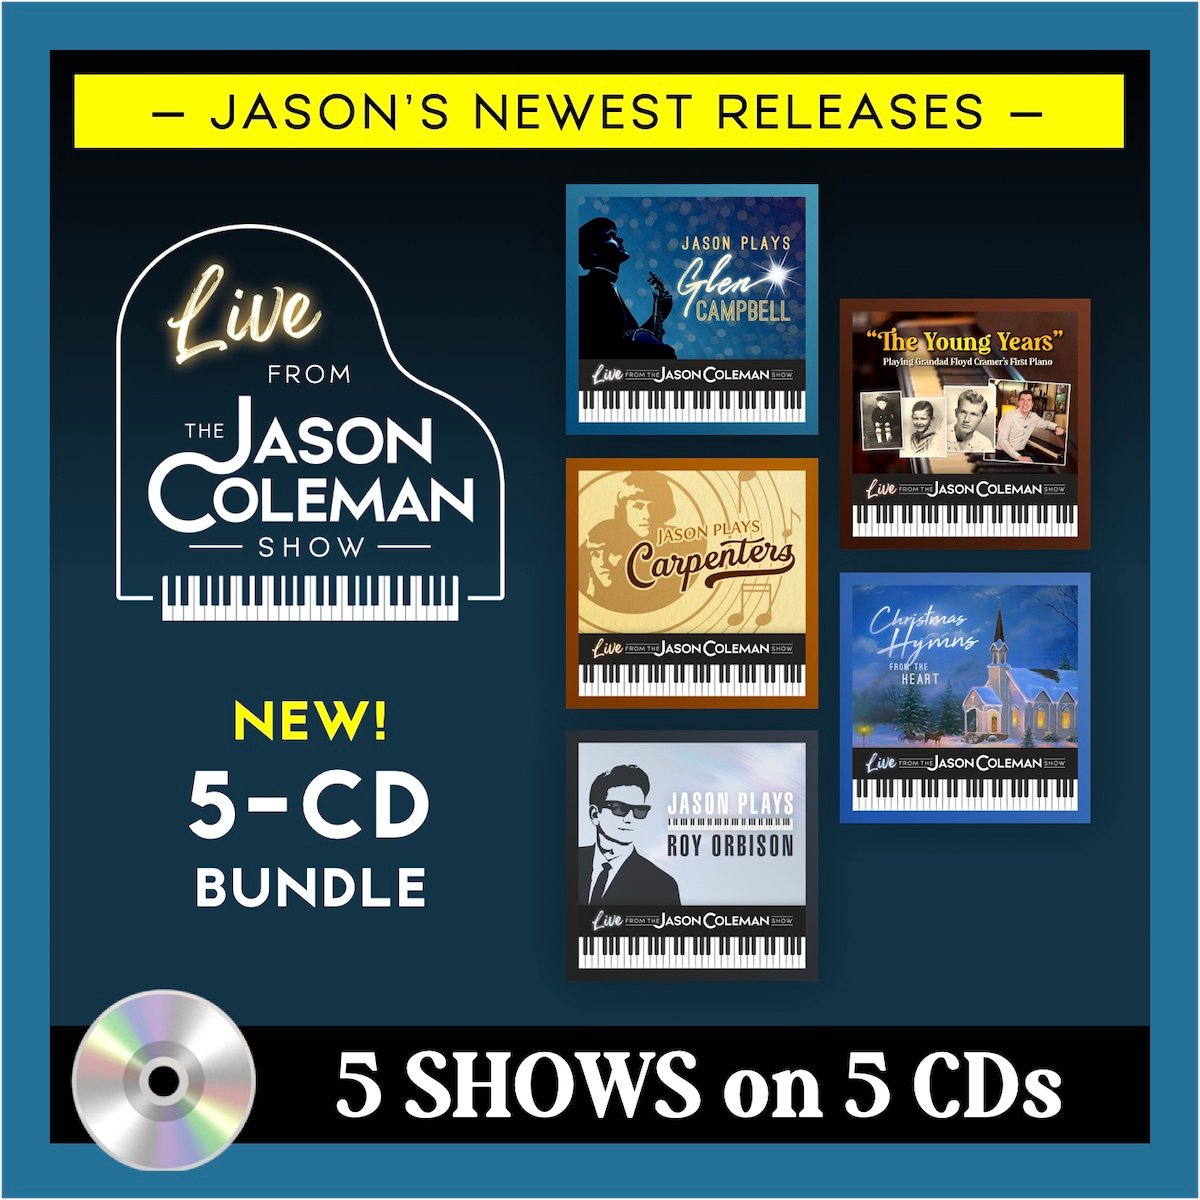 NEW! Live from The Jason Coleman Show 5-CD Bundle (Save $15)